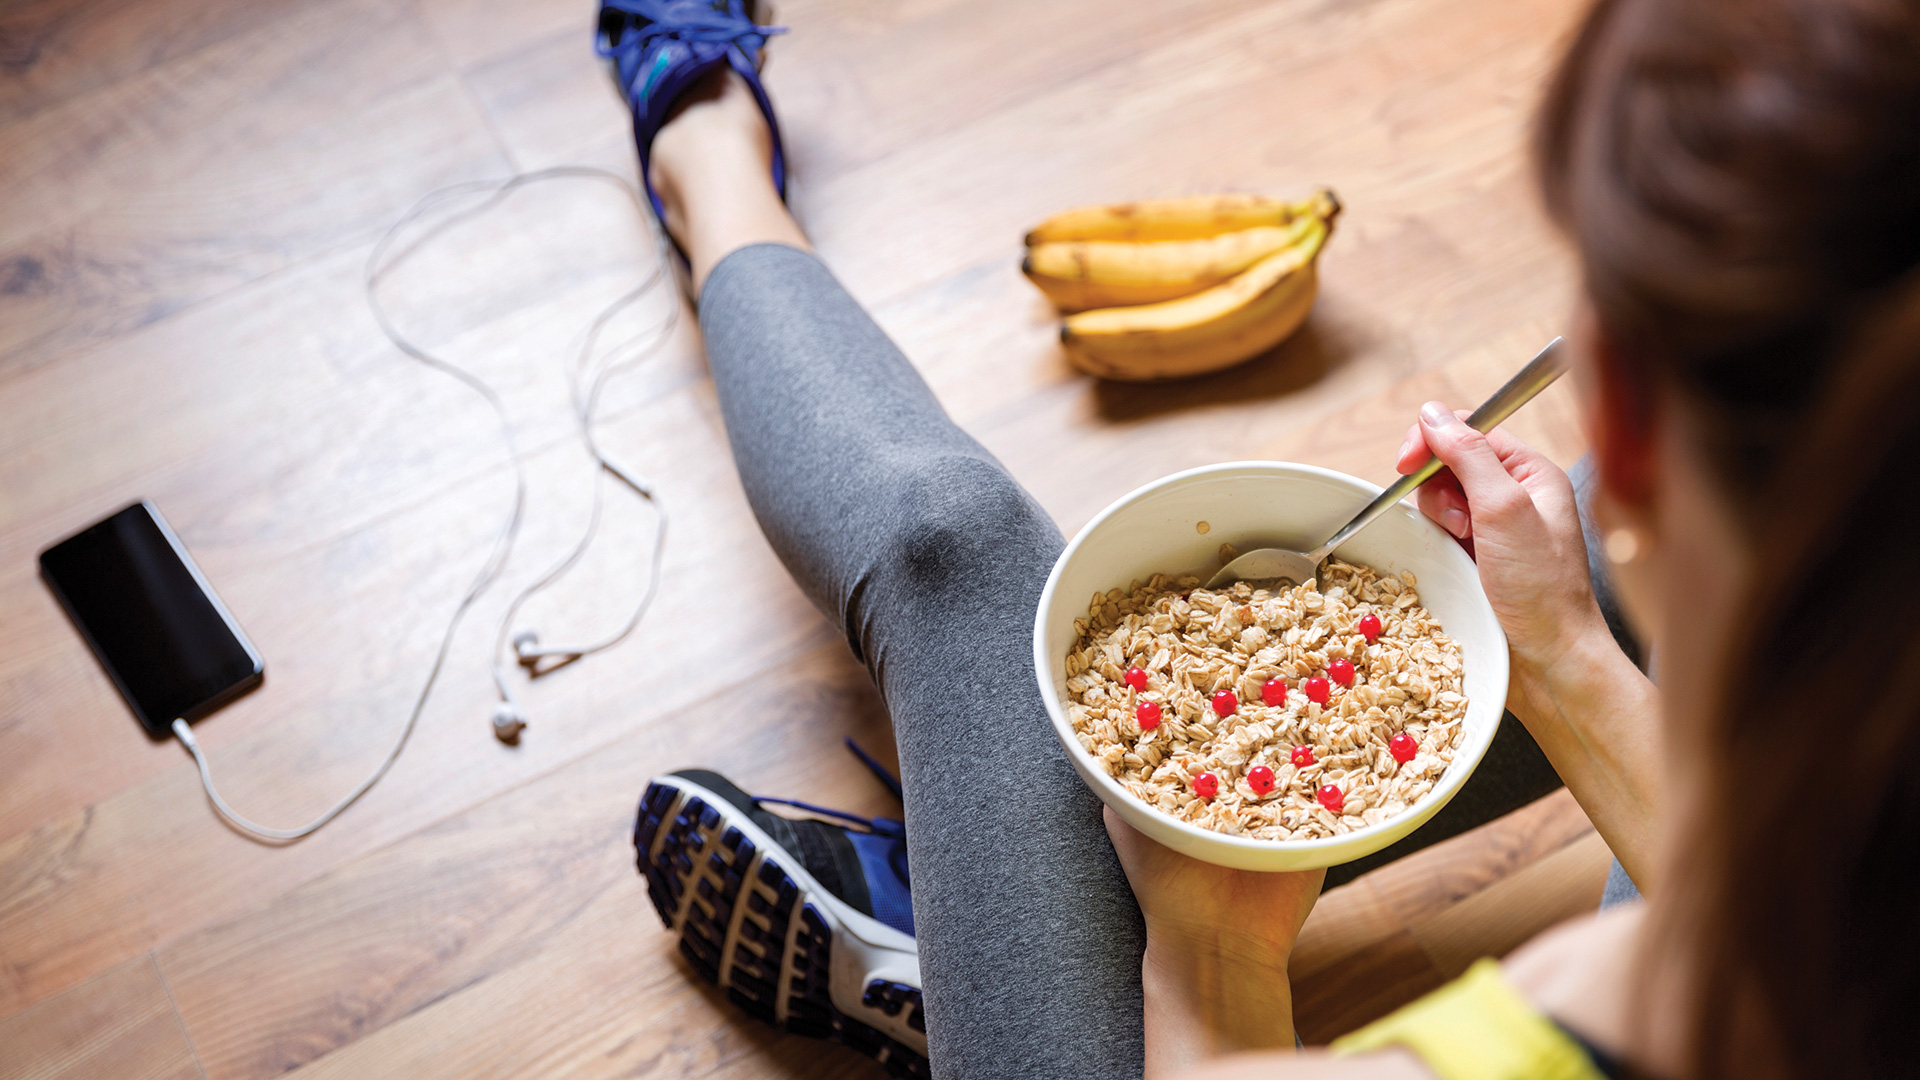 Getting the right nutrients before and after your workout can improve performance and keep you healthy. That’s why we spoke with Jennifer Lowrie, RDN, CSSD, LDN, CDE, a board specialist in sports dietetics dietitian at Atrium Health, to get tips that you need to fuel your workout. 